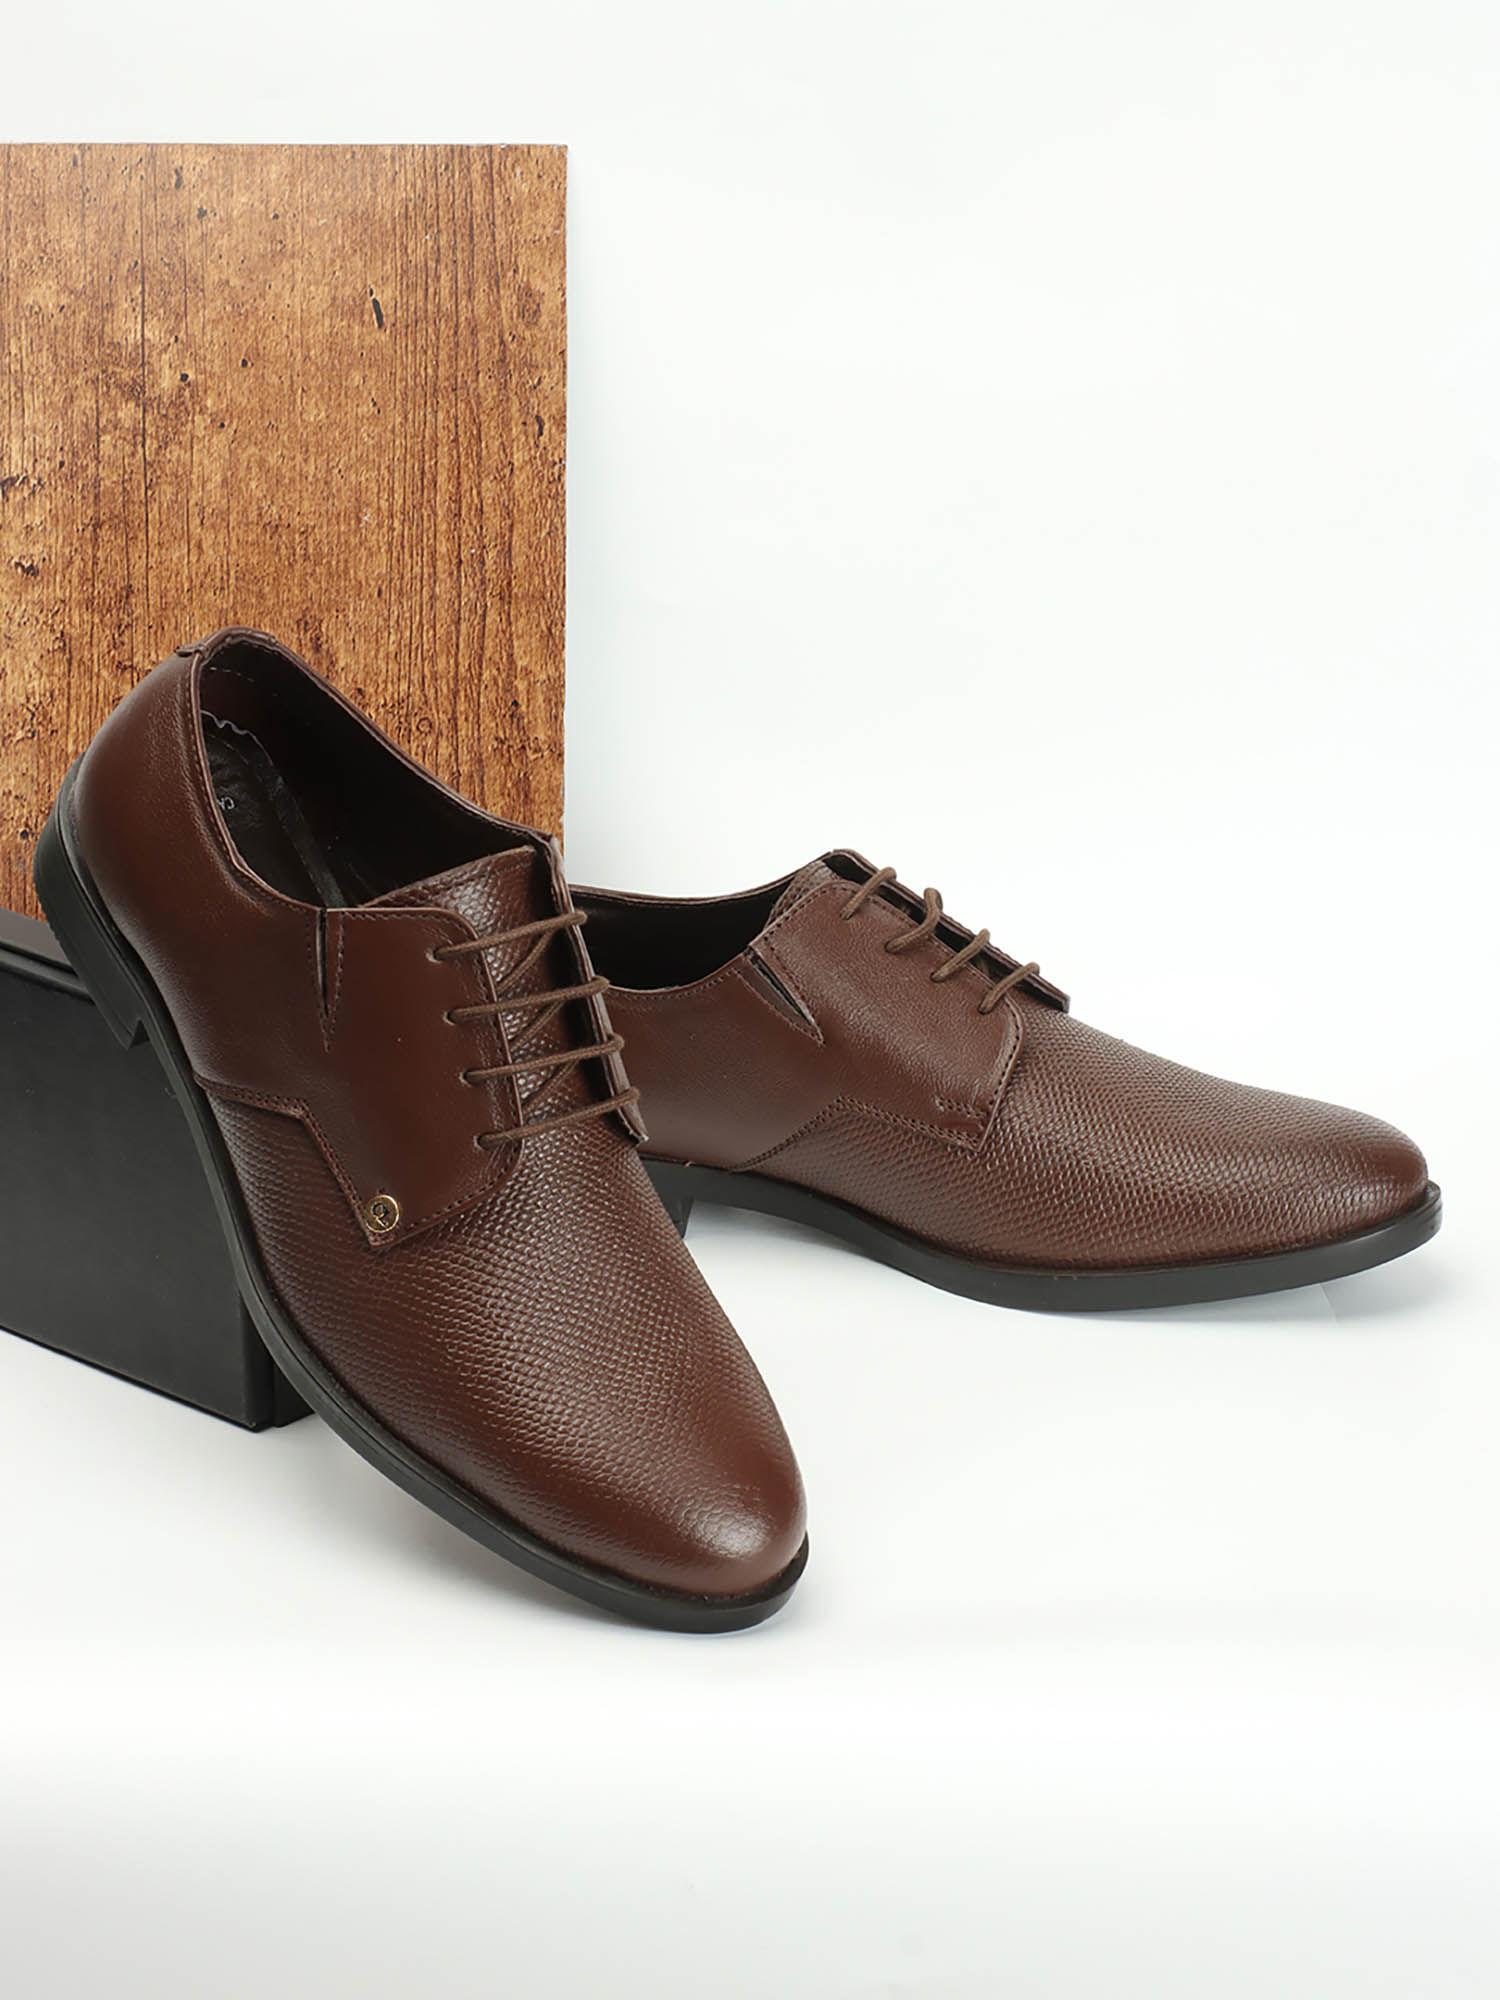 mens-stylish-brown-color-formal-lace-ups-leather-derbies